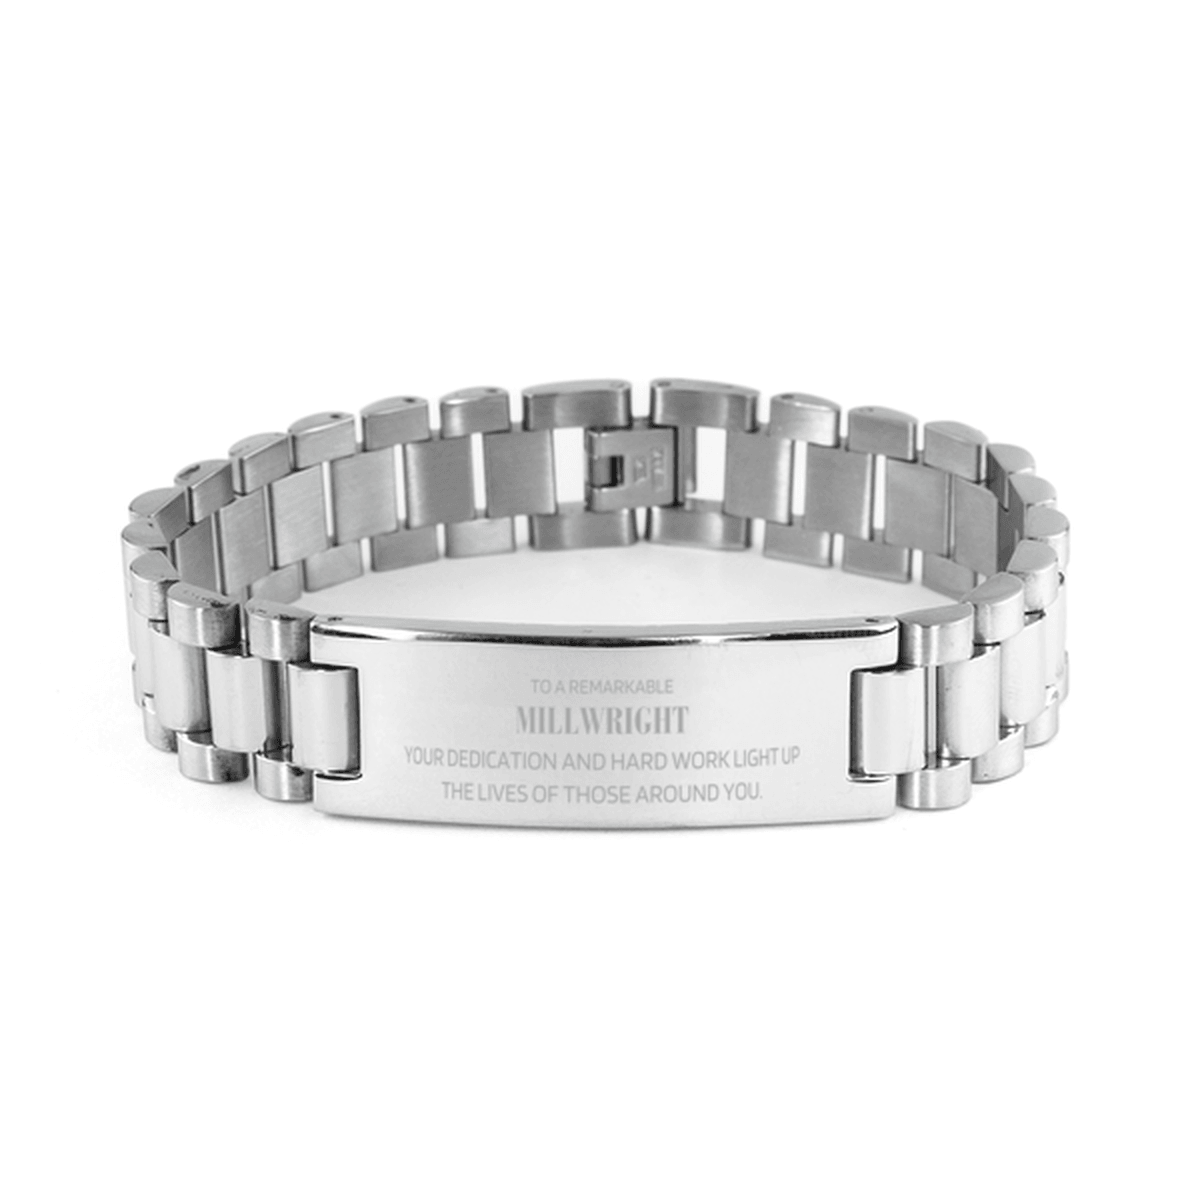 Remarkable Millwright Gifts, Your dedication and hard work, Inspirational Birthday Christmas Unique Ladder Stainless Steel Bracelet For Millwright, Coworkers, Men, Women, Friends - Mallard Moon Gift Shop